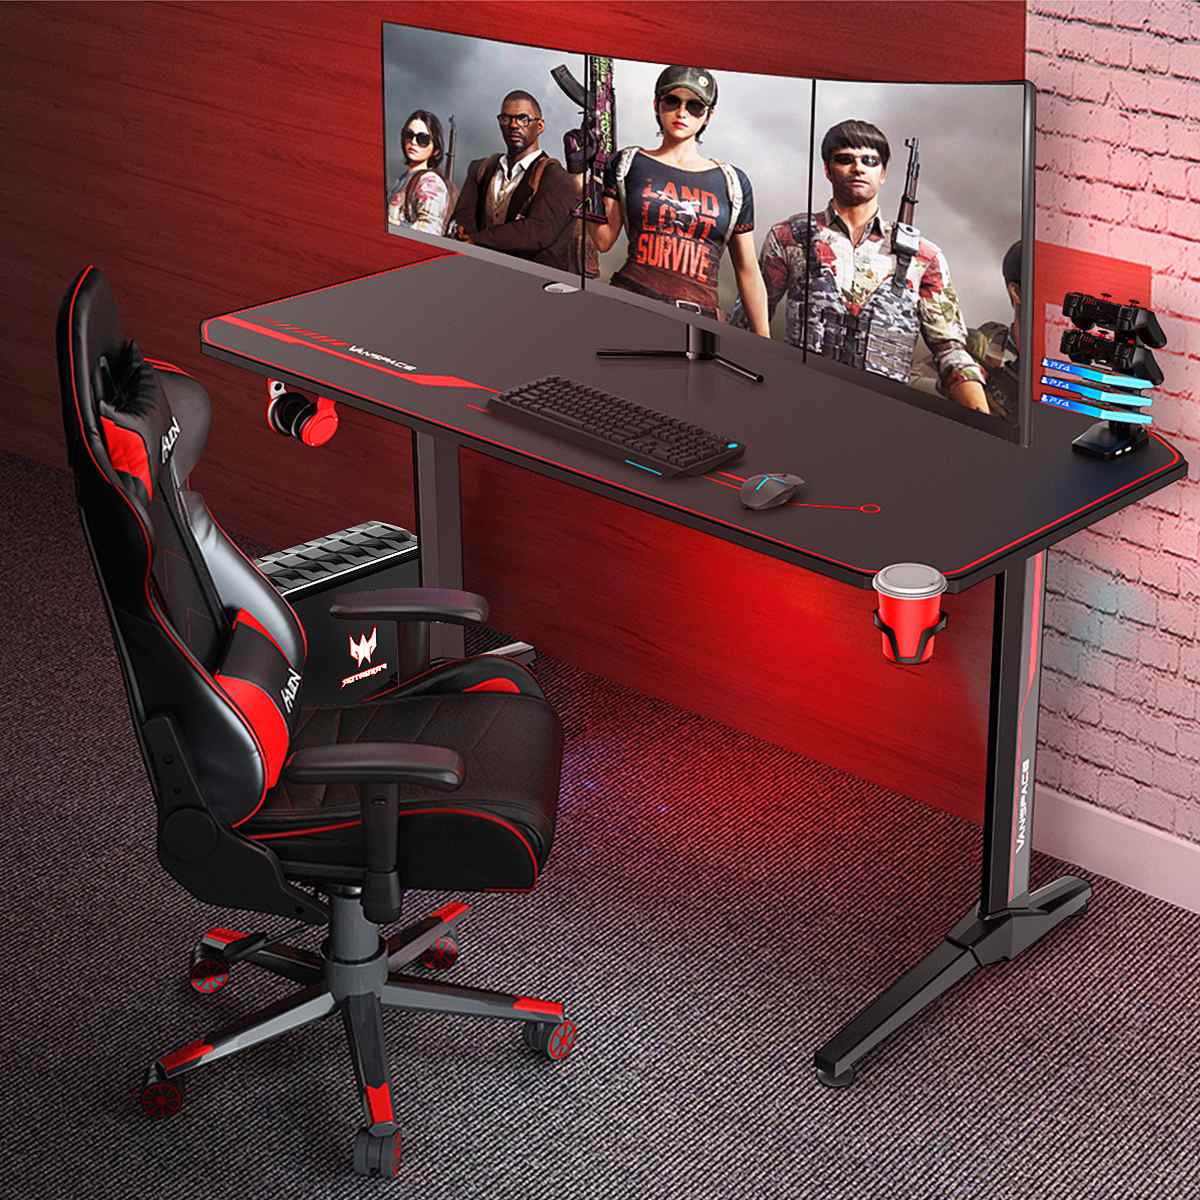 Professional Gaming Desk: Ergonomic PC Computer Workstation Furniture The luxurious black color and modern design of this gaming desk add a touch of sophistication to your gaming space. It's not only functional but also aesthetically pleasing, enhancing the overall look of your gaming setup. Durable Construction: The desk is constructed with high-quality particleboard and metal materials, ensuring long-lasting durability and stability. It can withstand the rigors of gaming, including heavy equipment and intense gameplay. Spacious Desktop: With a desktop size of 55.1" L x 23.6" W, you'll have ample space to accommodate multiple monitors, gaming peripherals, and other accessories. The generous surface area provides a clutter-free gaming experience. The 55 Inch Gaming Desk comes with a free mouse pad and is designed as an ergonomic T-shaped office desk. This piece of furniture is perfect for PC and computer gaming, serving as a professional workstation for gamers.